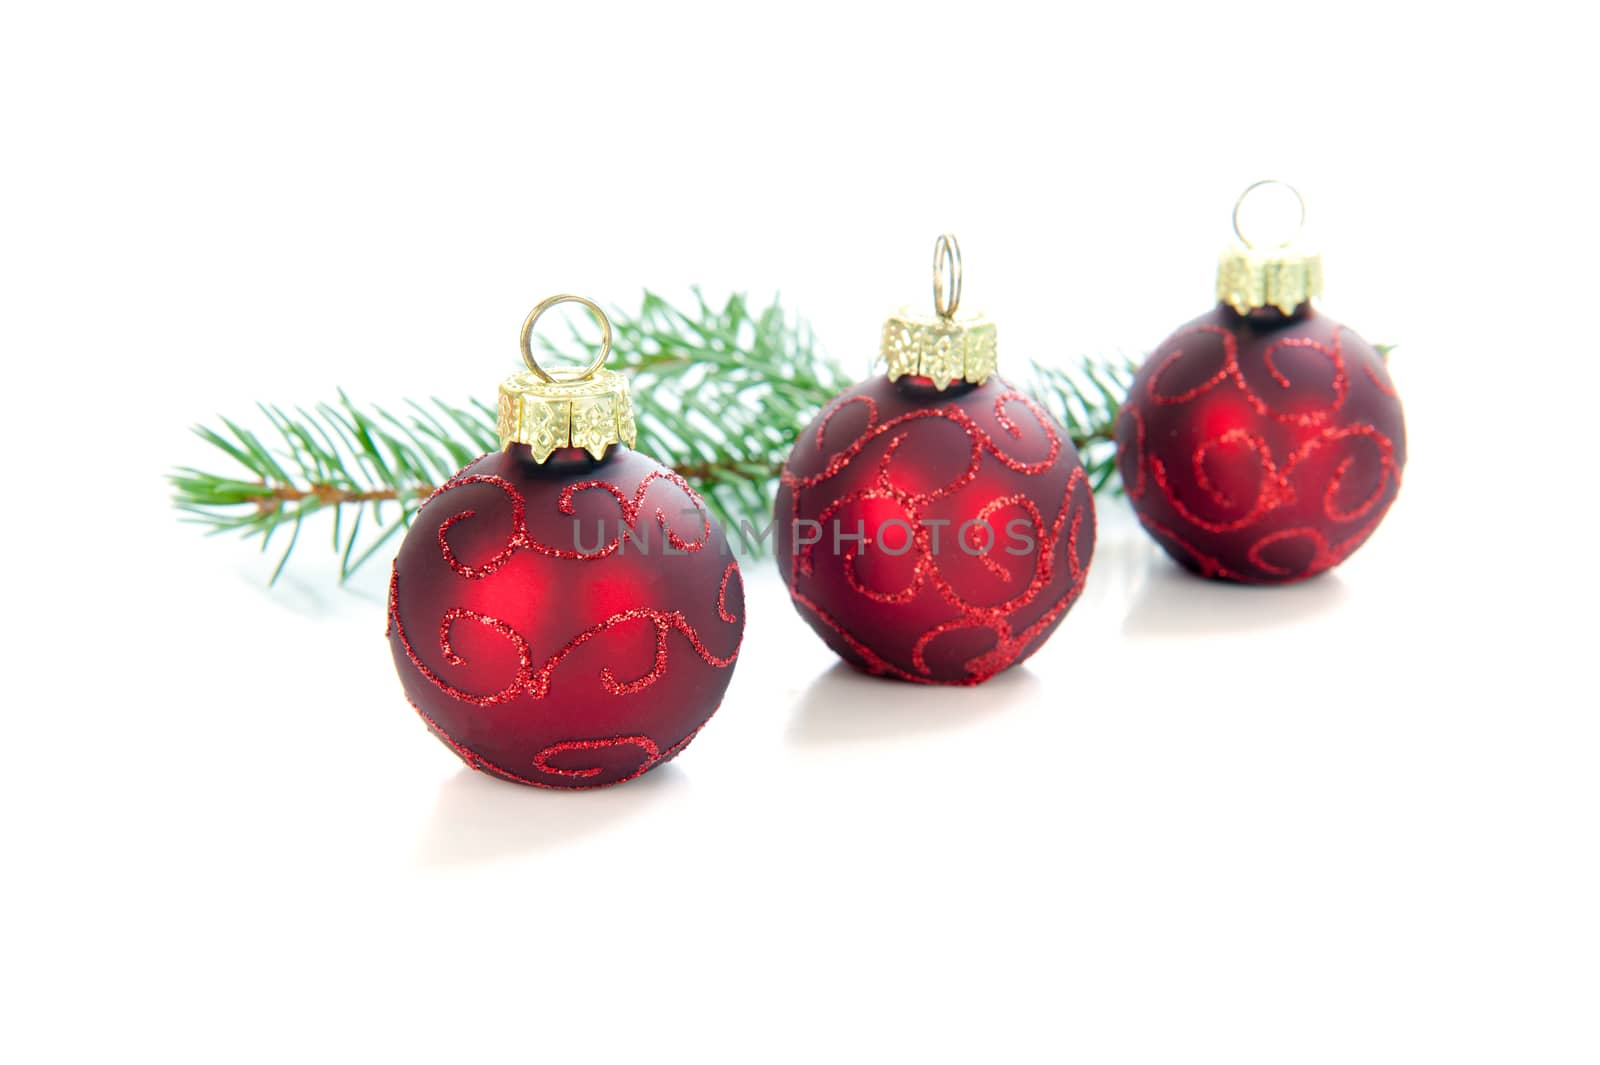 Three christmasballs in a row on a white background